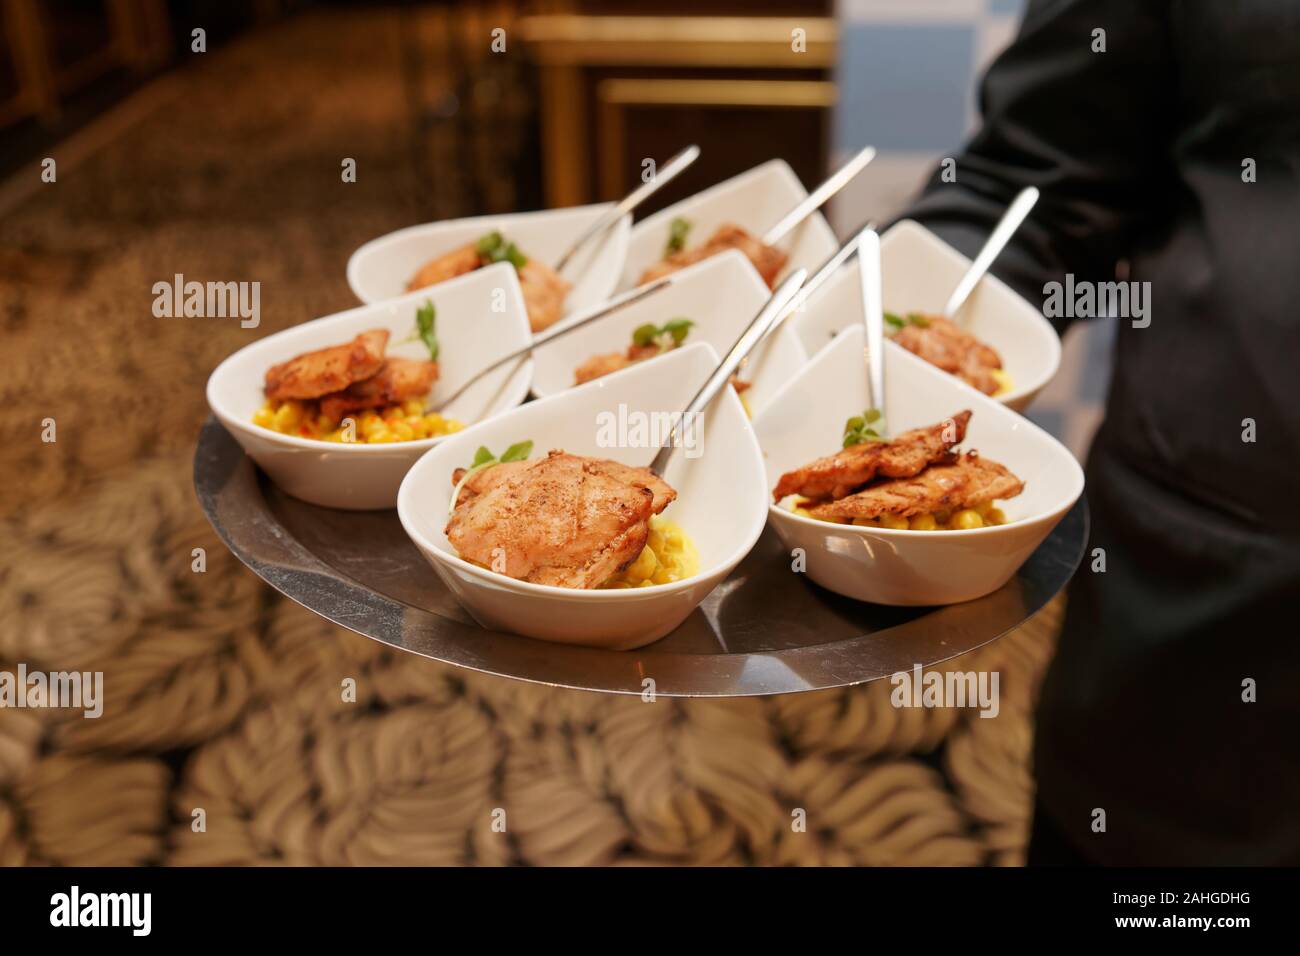 Waiter carries tray with banquet food plates Stock Photo